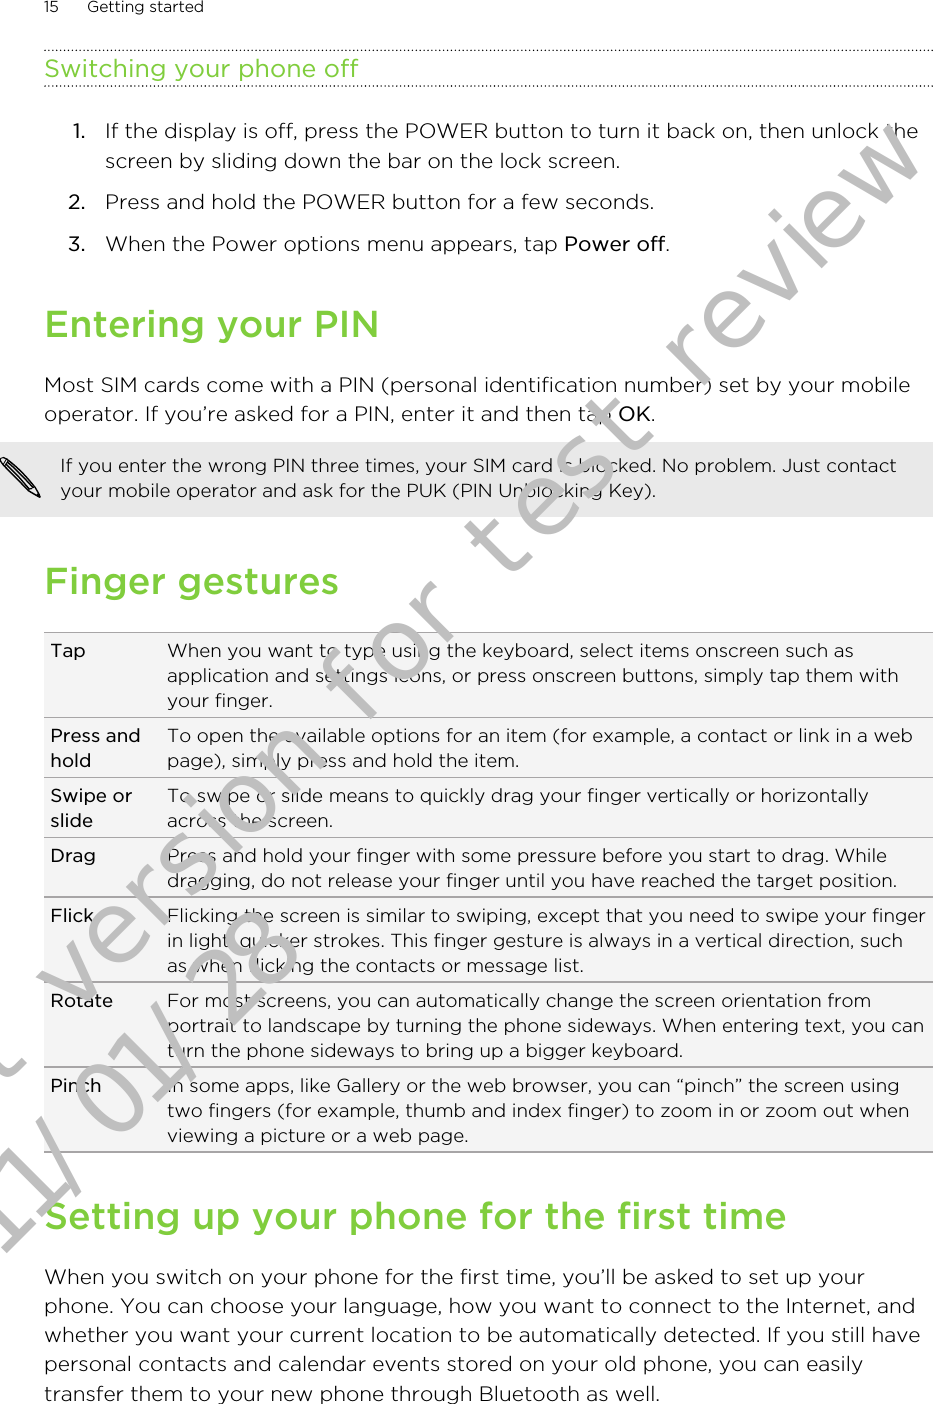 Switching your phone off1. If the display is off, press the POWER button to turn it back on, then unlock thescreen by sliding down the bar on the lock screen.2. Press and hold the POWER button for a few seconds.3. When the Power options menu appears, tap Power off.Entering your PINMost SIM cards come with a PIN (personal identification number) set by your mobileoperator. If you’re asked for a PIN, enter it and then tap OK.If you enter the wrong PIN three times, your SIM card is blocked. No problem. Just contactyour mobile operator and ask for the PUK (PIN Unblocking Key).Finger gesturesTap When you want to type using the keyboard, select items onscreen such asapplication and settings icons, or press onscreen buttons, simply tap them withyour finger.Press andholdTo open the available options for an item (for example, a contact or link in a webpage), simply press and hold the item.Swipe orslideTo swipe or slide means to quickly drag your finger vertically or horizontallyacross the screen.Drag Press and hold your finger with some pressure before you start to drag. Whiledragging, do not release your finger until you have reached the target position.Flick Flicking the screen is similar to swiping, except that you need to swipe your fingerin light, quicker strokes. This finger gesture is always in a vertical direction, suchas when flicking the contacts or message list.Rotate For most screens, you can automatically change the screen orientation fromportrait to landscape by turning the phone sideways. When entering text, you canturn the phone sideways to bring up a bigger keyboard.Pinch In some apps, like Gallery or the web browser, you can “pinch” the screen usingtwo fingers (for example, thumb and index finger) to zoom in or zoom out whenviewing a picture or a web page.Setting up your phone for the first timeWhen you switch on your phone for the first time, you’ll be asked to set up yourphone. You can choose your language, how you want to connect to the Internet, andwhether you want your current location to be automatically detected. If you still havepersonal contacts and calendar events stored on your old phone, you can easilytransfer them to your new phone through Bluetooth as well.15 Getting startedDraft version for test review 2011/01/28 